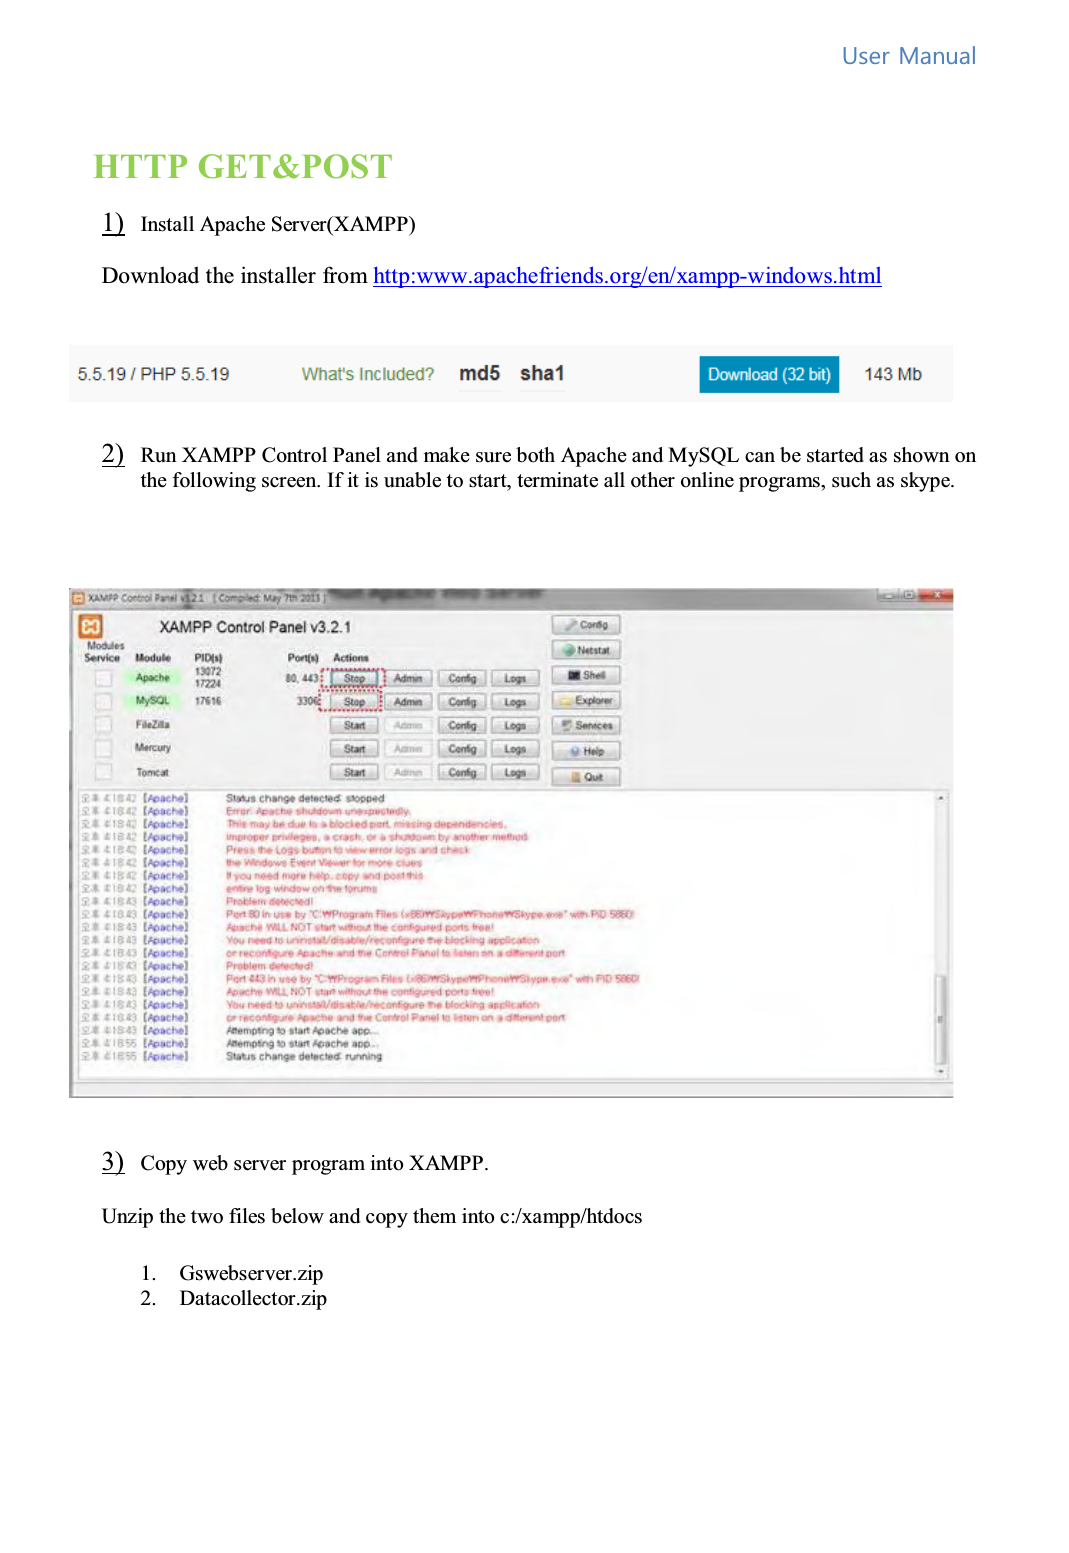   8VHU0DQXDO HTTP GET&amp;POST 1) Install Apache Server(XAMPP)  Download the installer from http:www.apachefriends.org/en/xampp-windows.html    2) Run XAMPP Control Panel and make sure both Apache and MySQL can be started as shown on the following screen. If it is unable to start, terminate all other online programs, such as skype.     3) Copy web server program into XAMPP.  Unzip the two files below and copy them into c:/xampp/htdocs  1. Gswebserver.zip 2. Datacollector.zip     